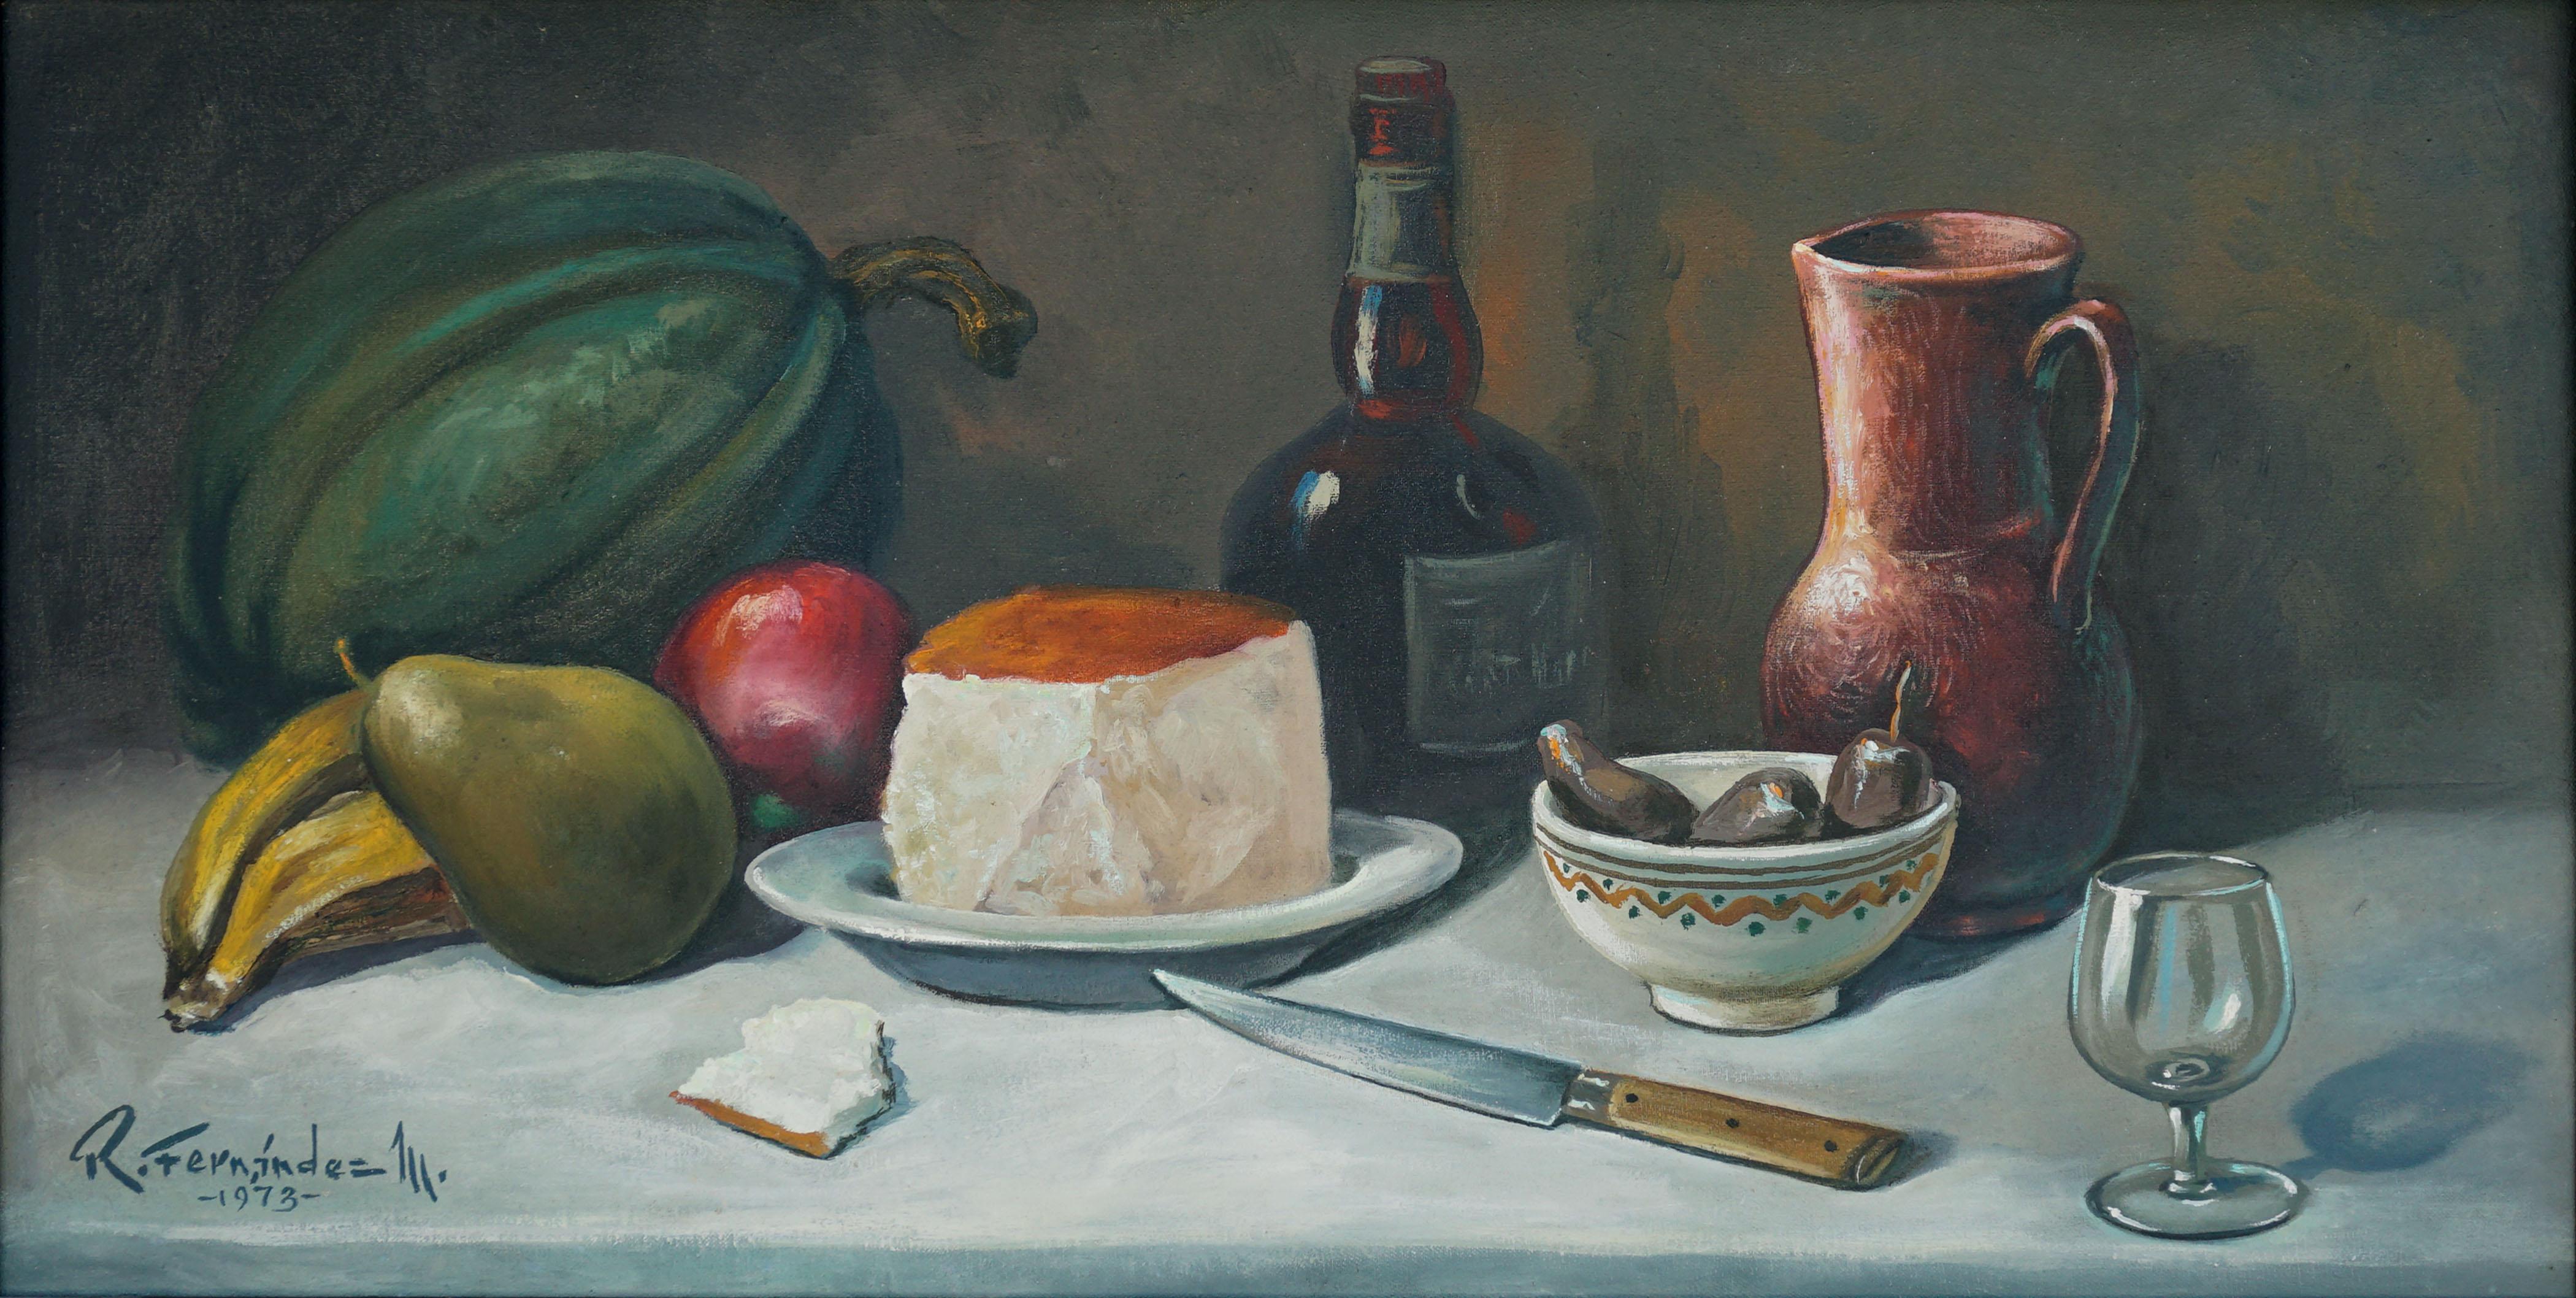 Fruit, Cheese and Grand Marnier Still Life - Painting by R Fernandez